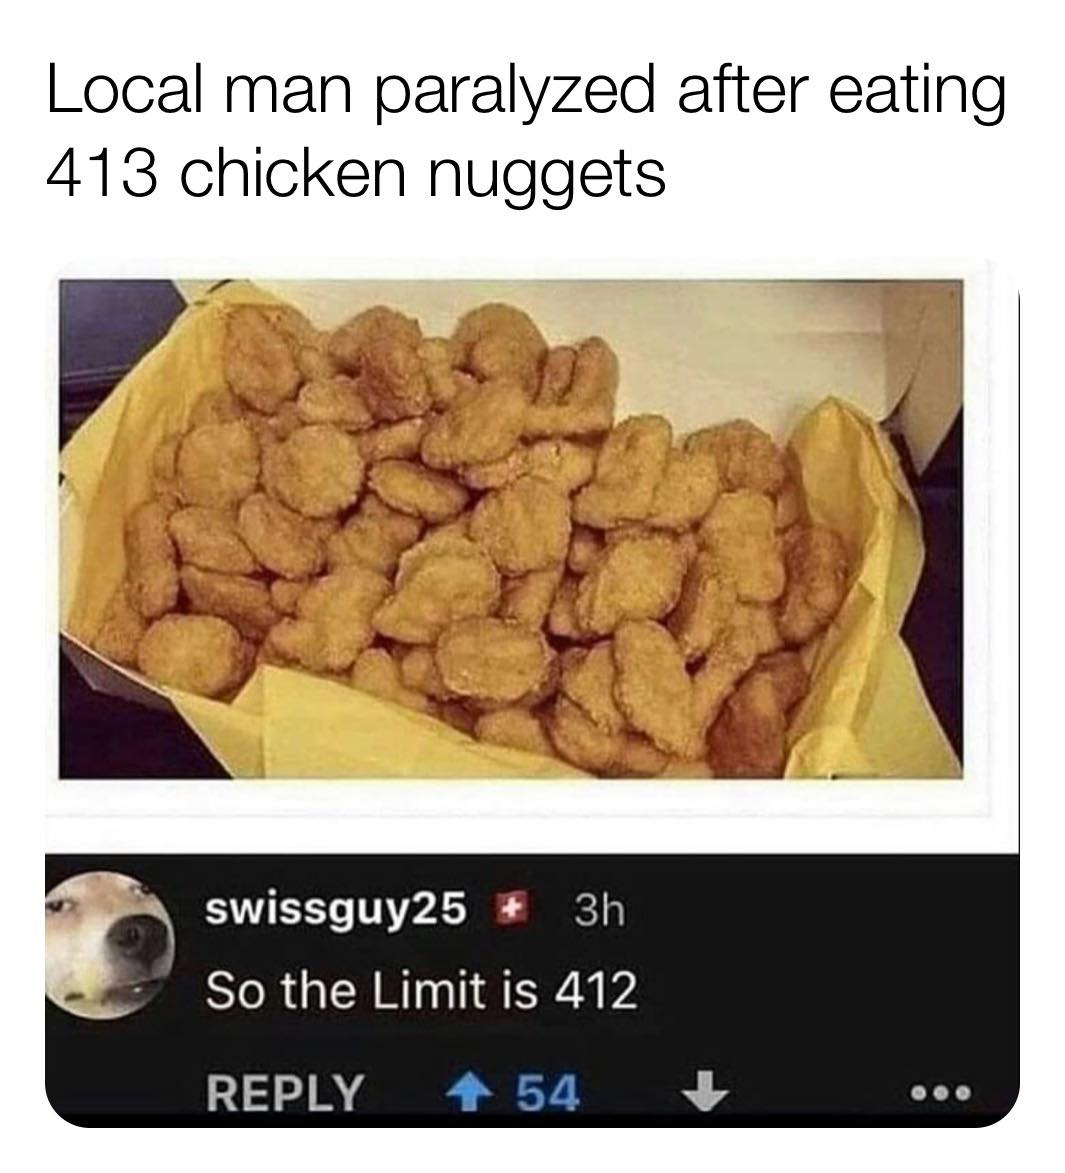 man paralysed after eating 413 chicken nuggets - Local man paralyzed after eating 413 chicken nuggets swissguy25 3h So the Limit is 412 54